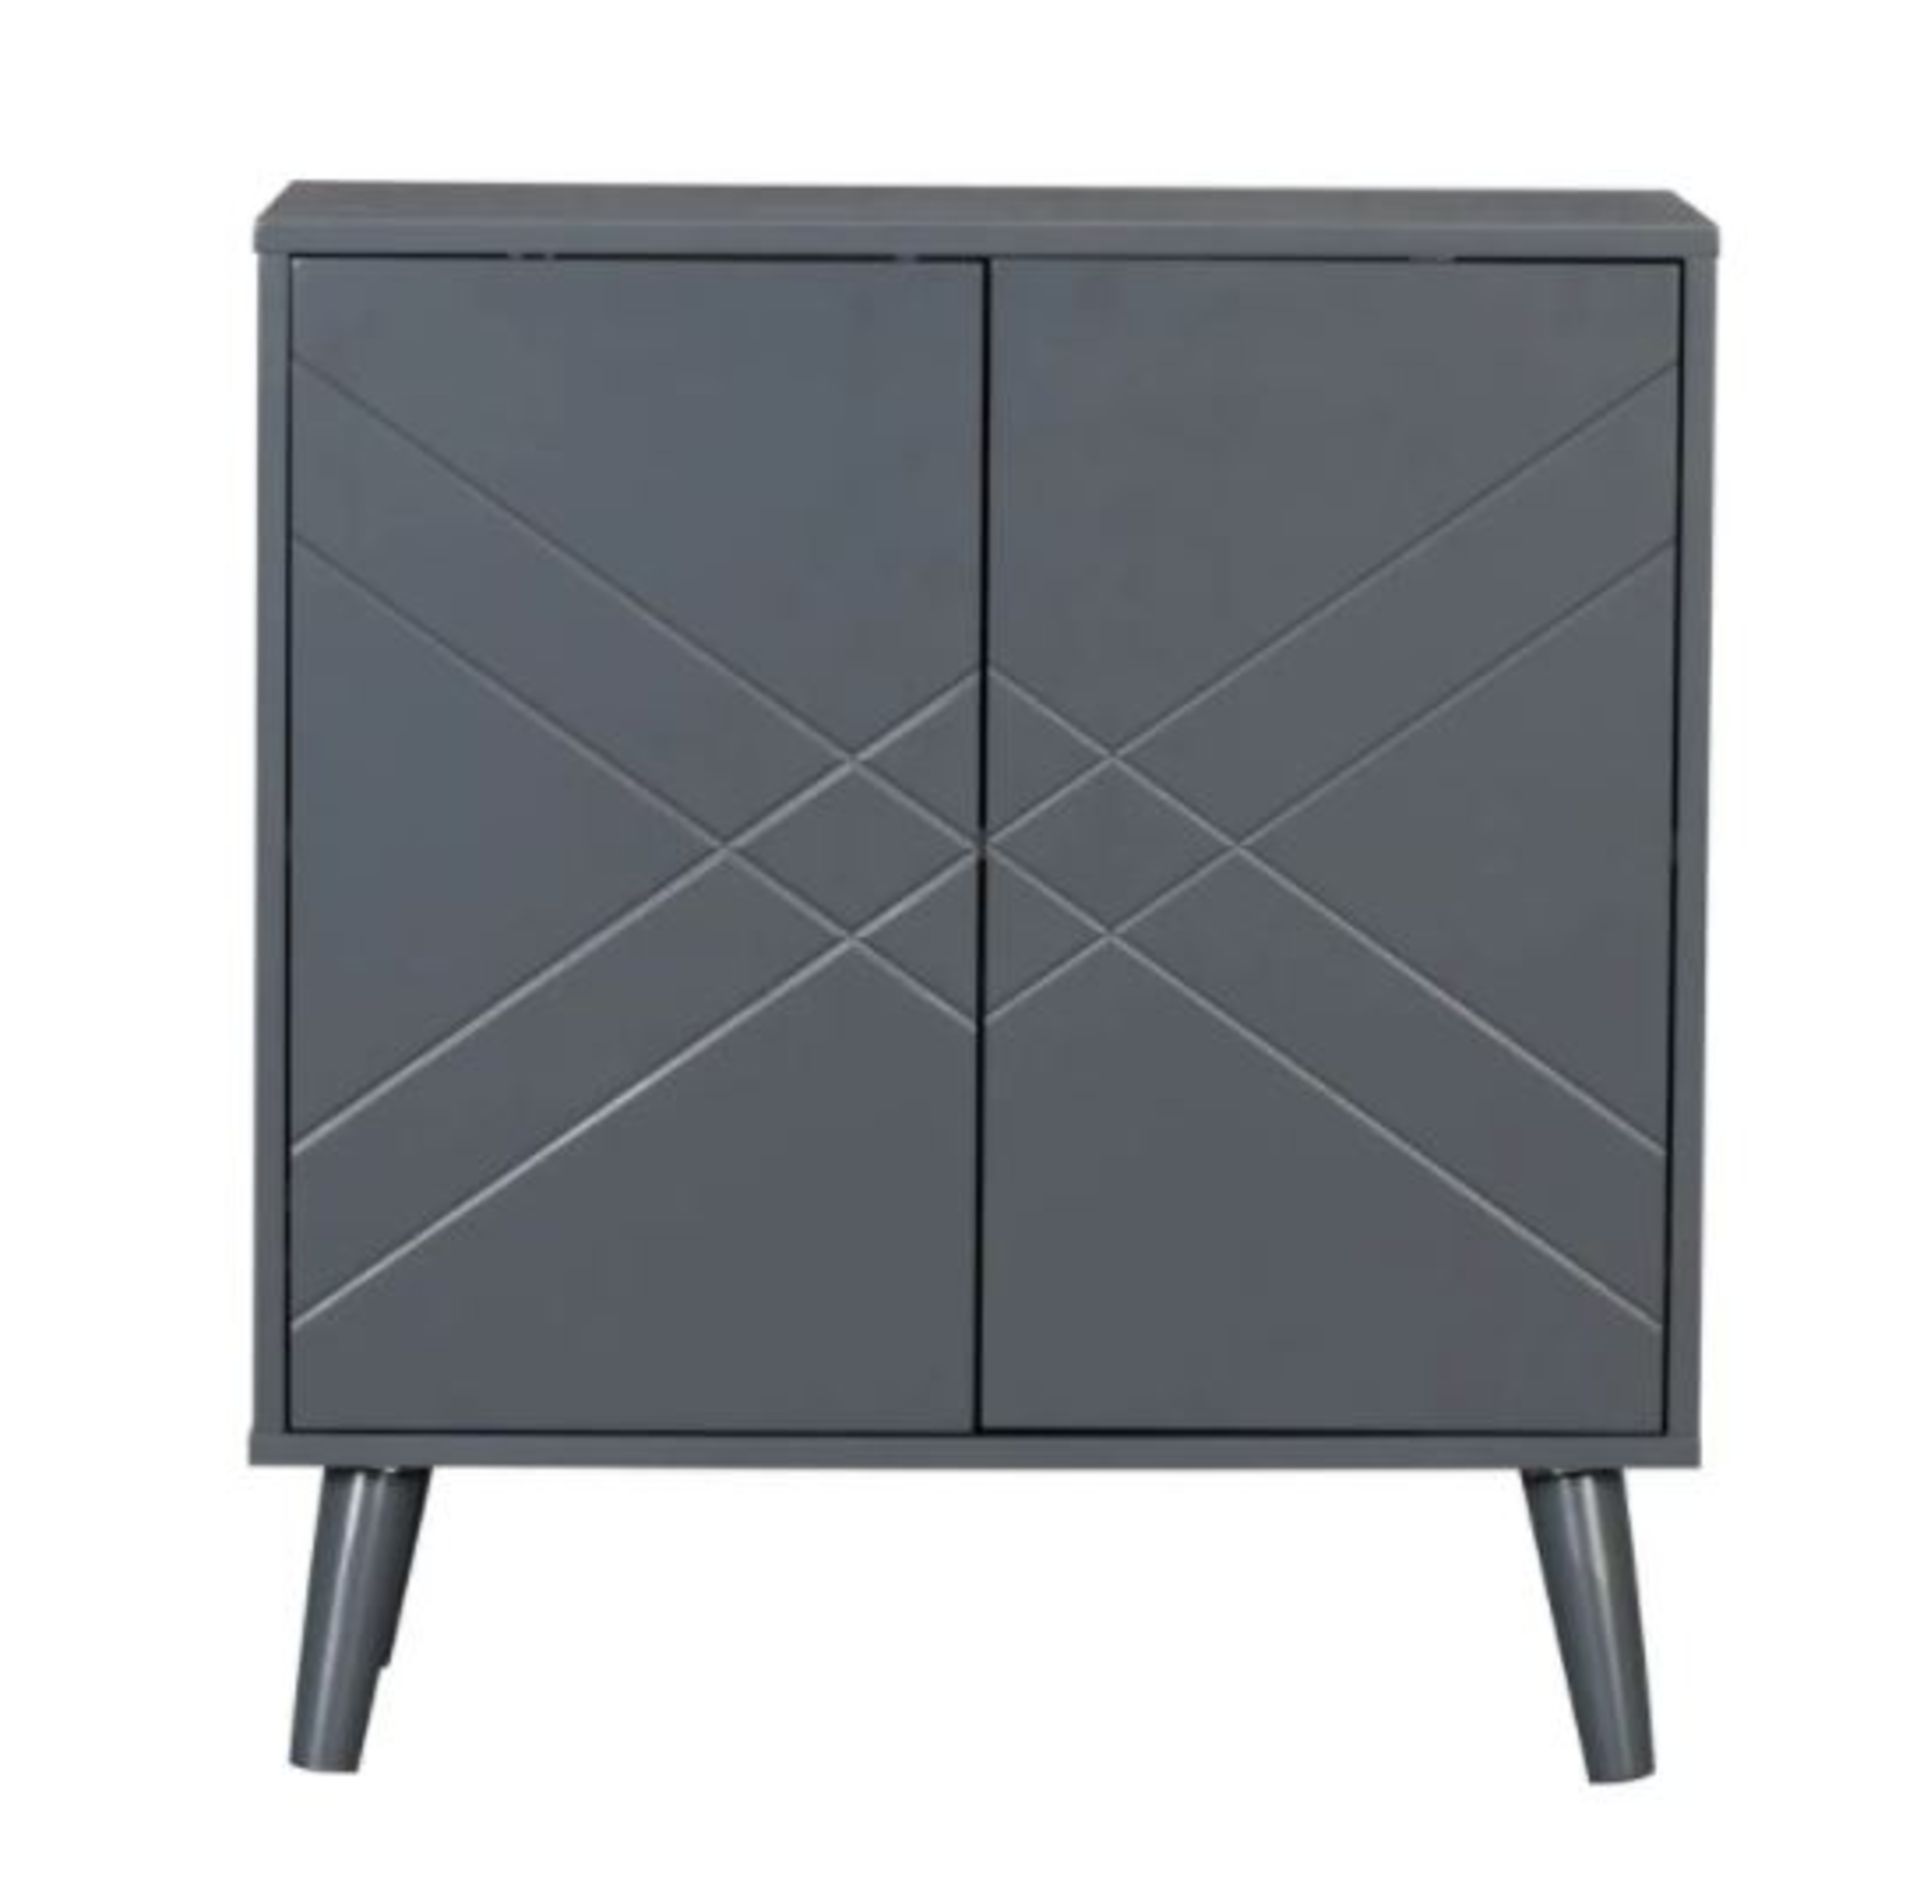 (R7G) 2x Hamilton Hallway Cabinet Charcoal RRP £60 Each - Image 3 of 5